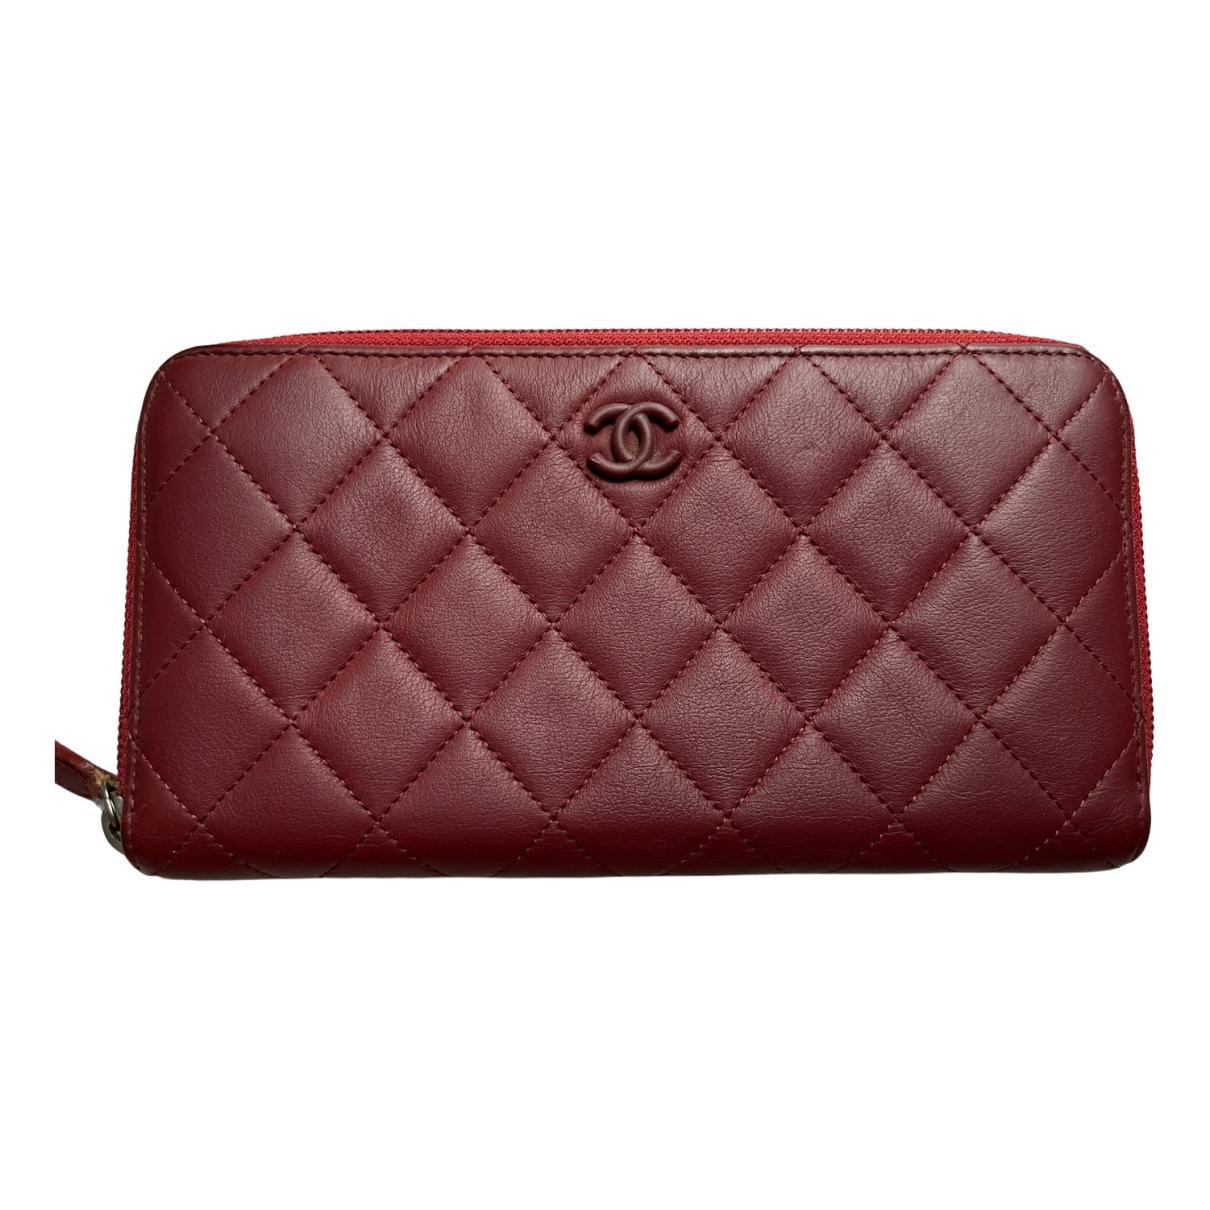 Timeless/classique leather wallet Chanel Pink in Leather - 35232697